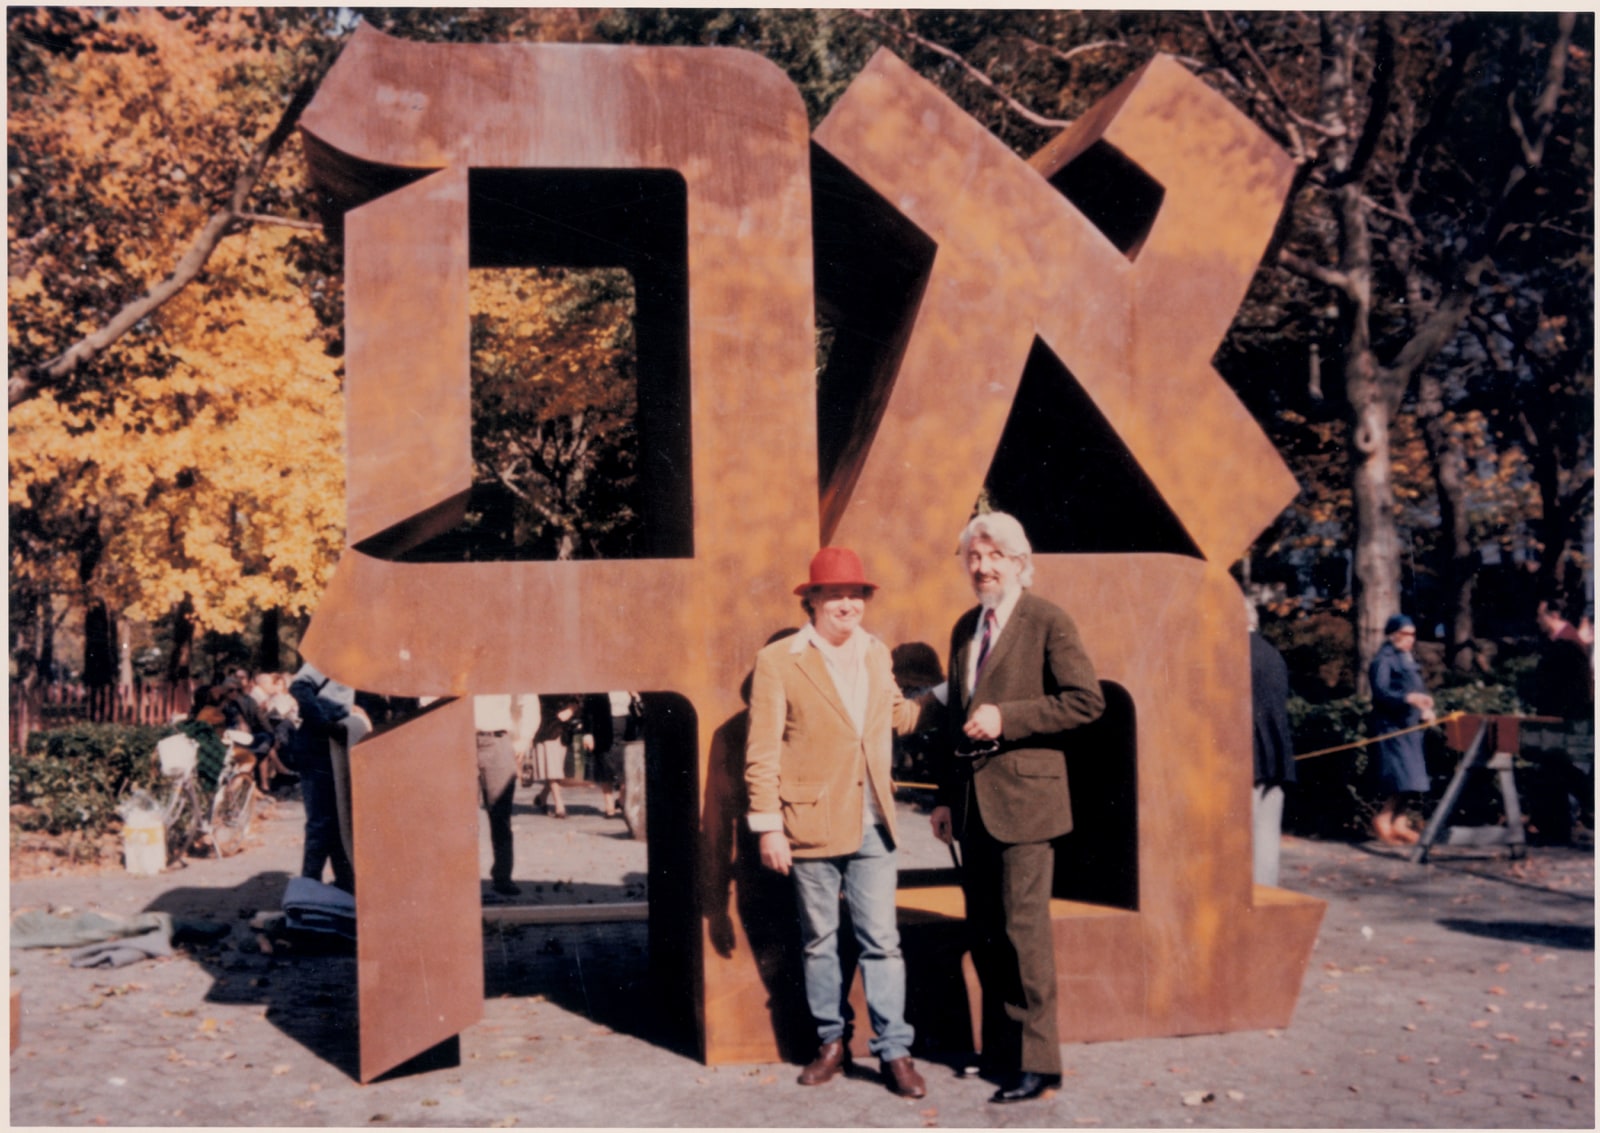 Indiana and Robert L. B. Tobin with AHAVA (1977), installed at Fifth Avenue and Sixtieth Street, New York, October 25, 1978. Image courtesy of The Star of Hope, Vinalhaven, Maine